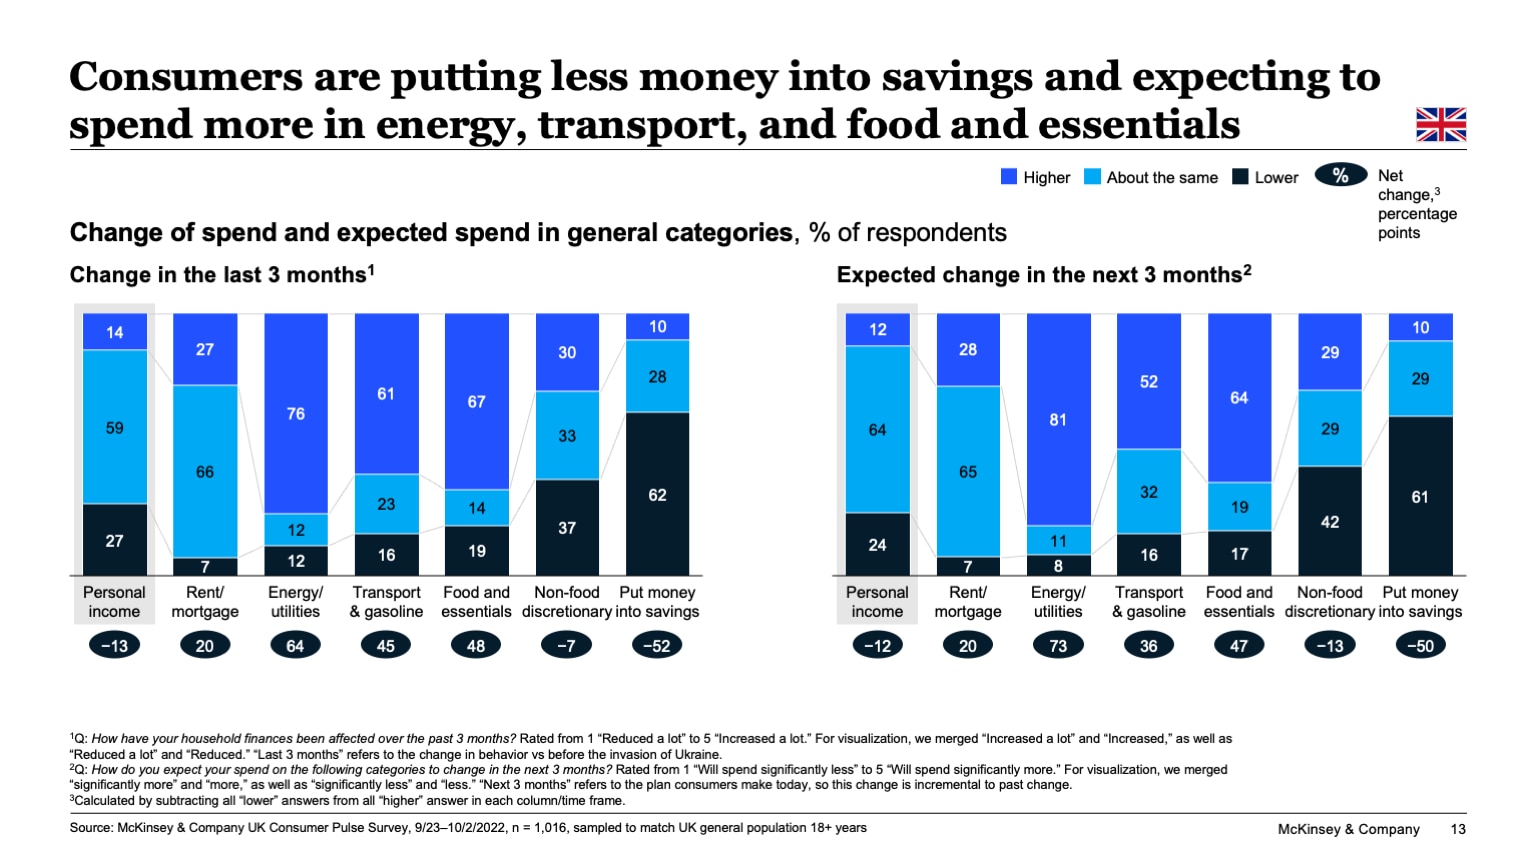 Consumers are putting less money into savings and expecting to spend more in energy, transport, and food and essentials